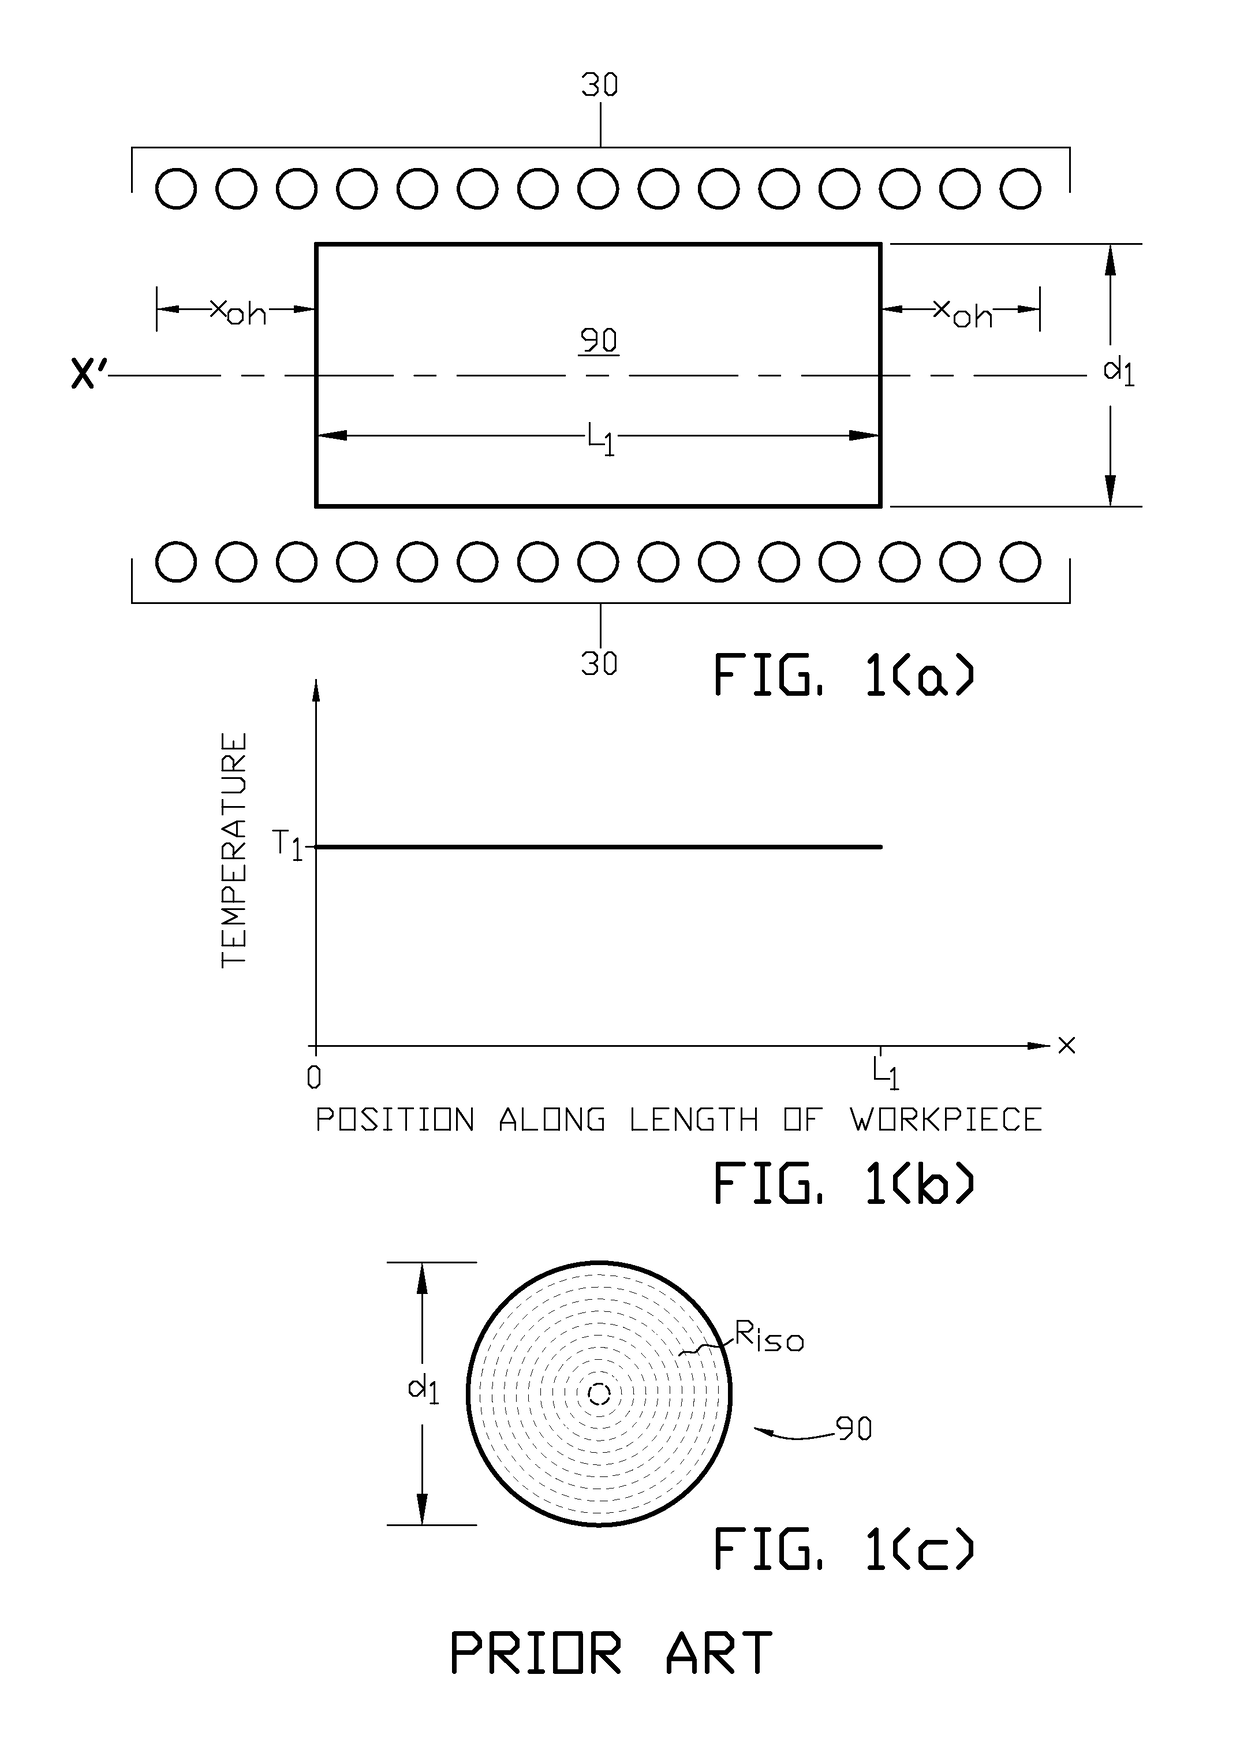 Controlled electric induction heating of an electrically conductive workpiece in a solenoidal coil with flux compensators